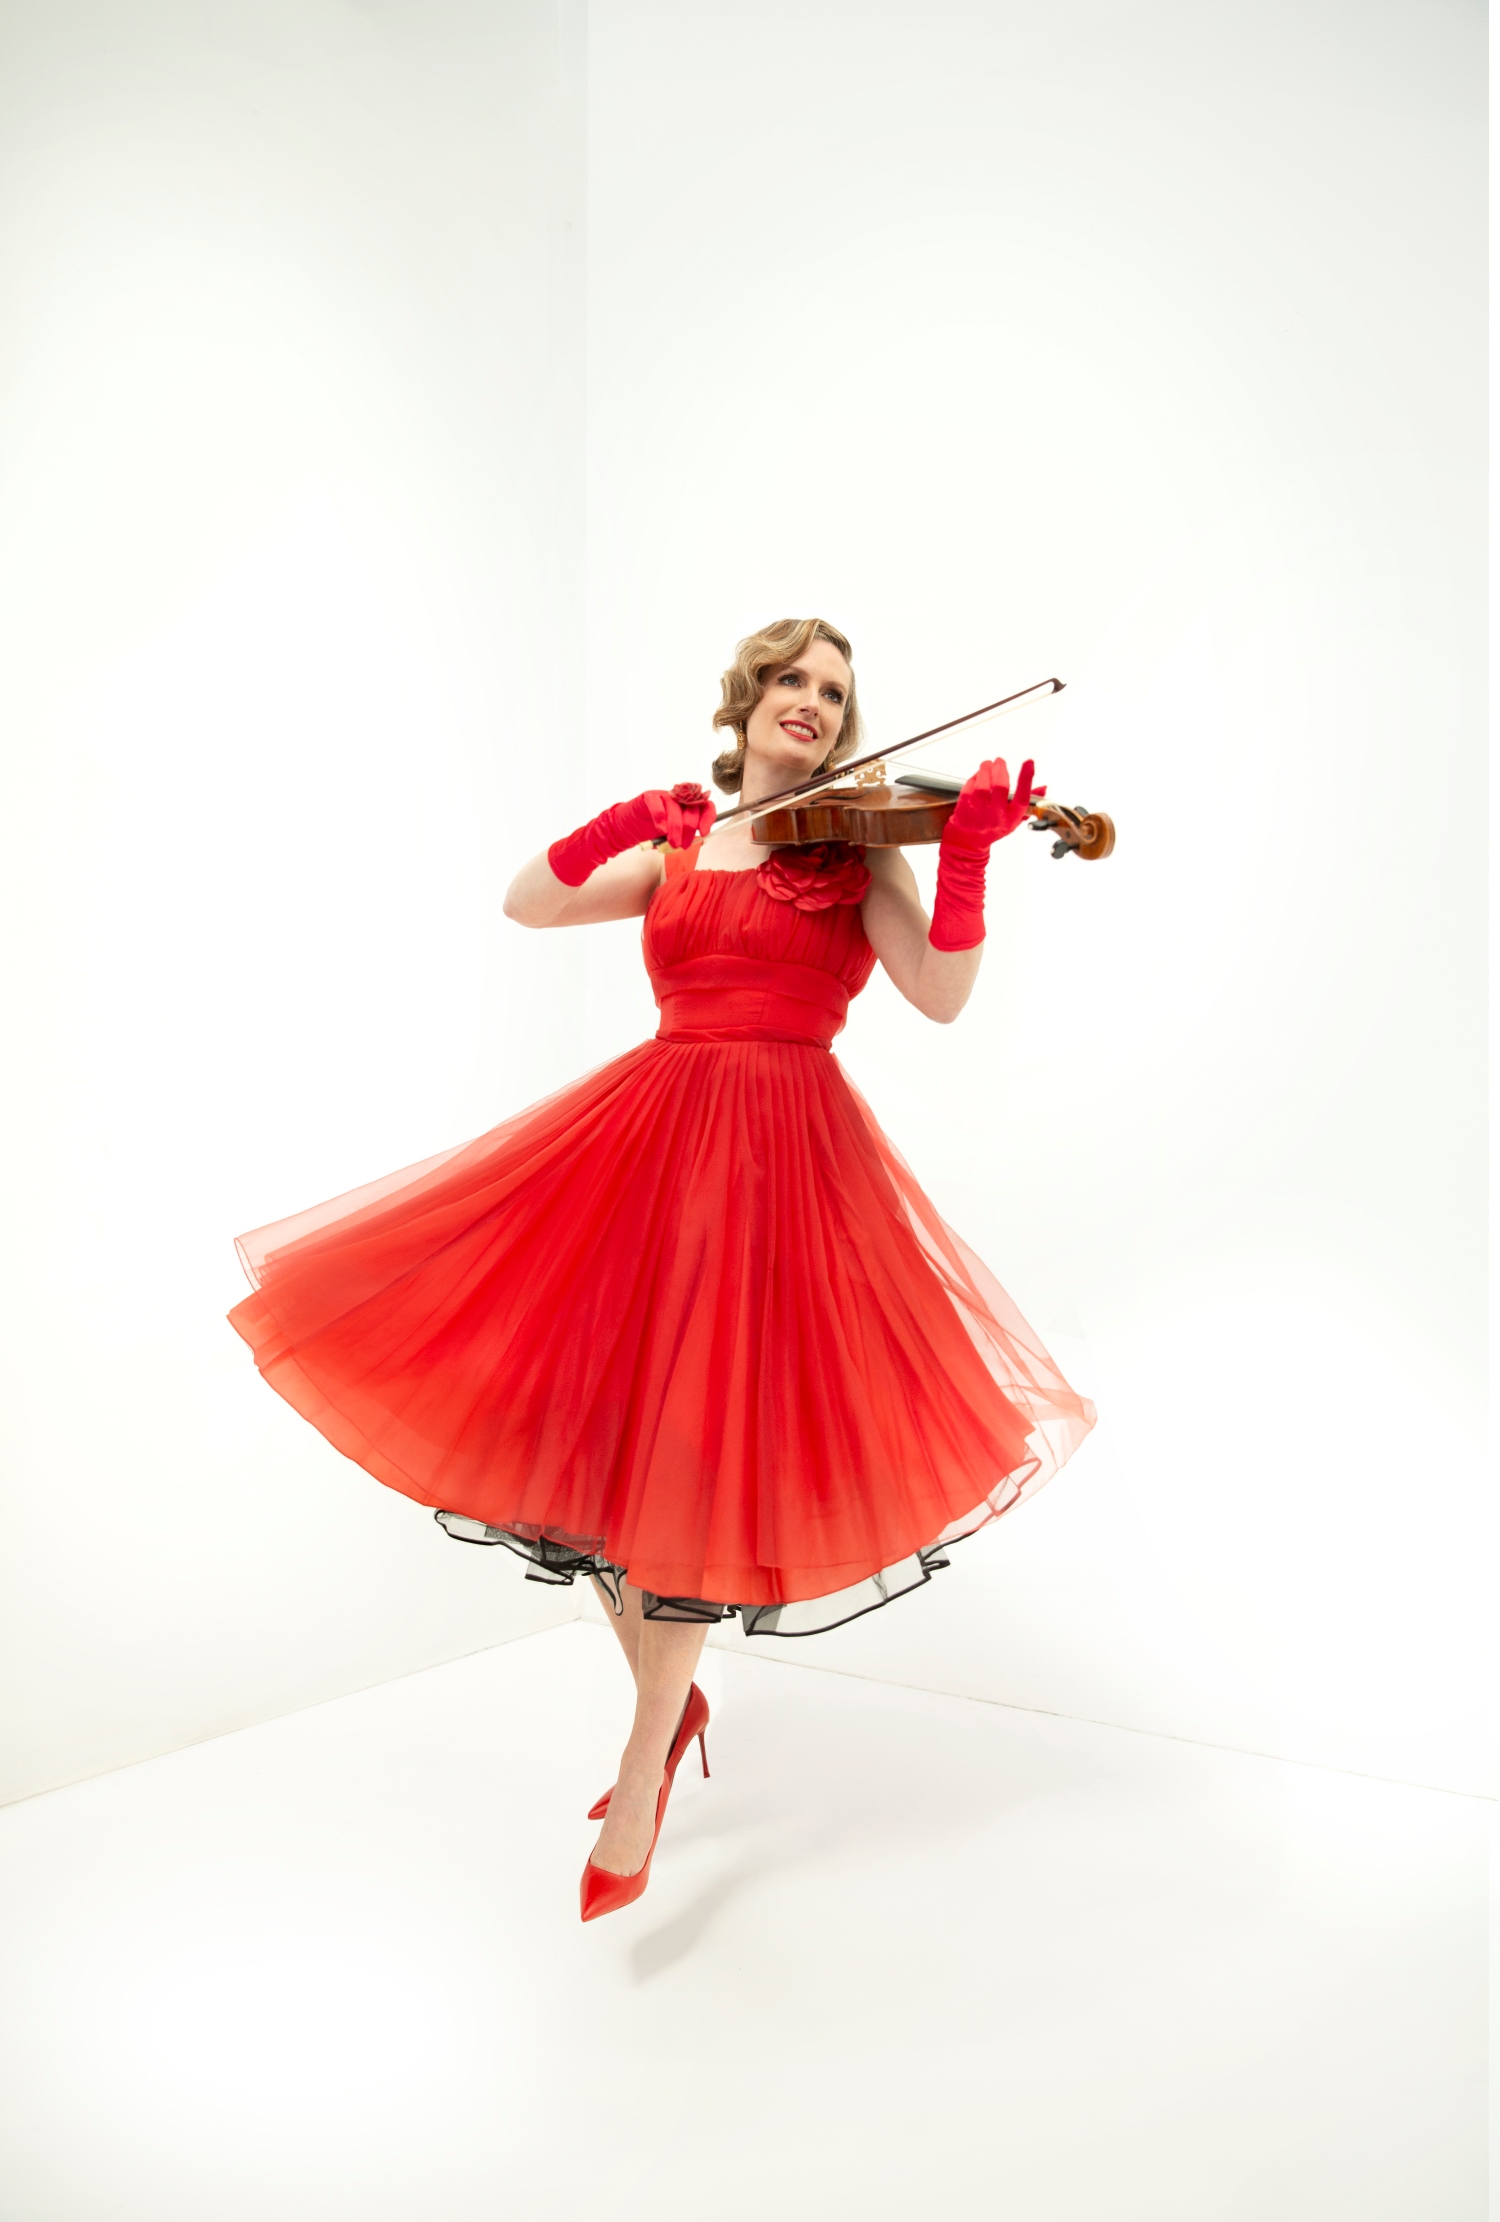 Woman wearing a red dress and playing a violin